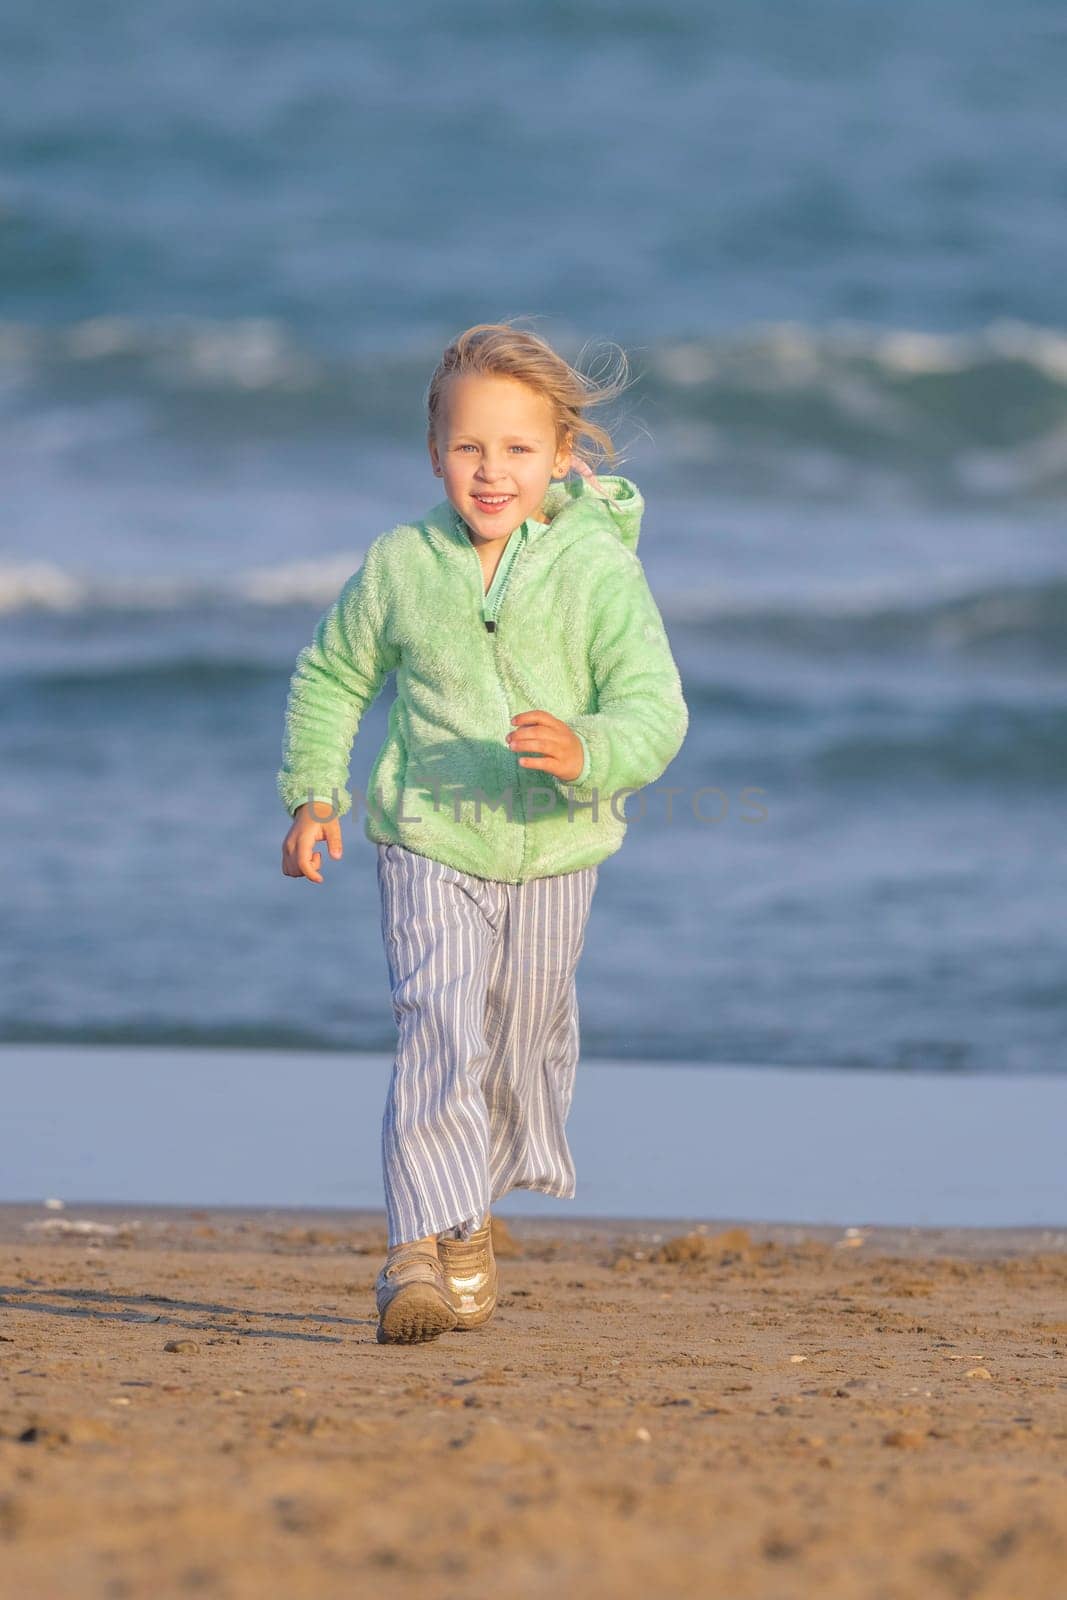 The girl is running along the beach by the sea by gcm